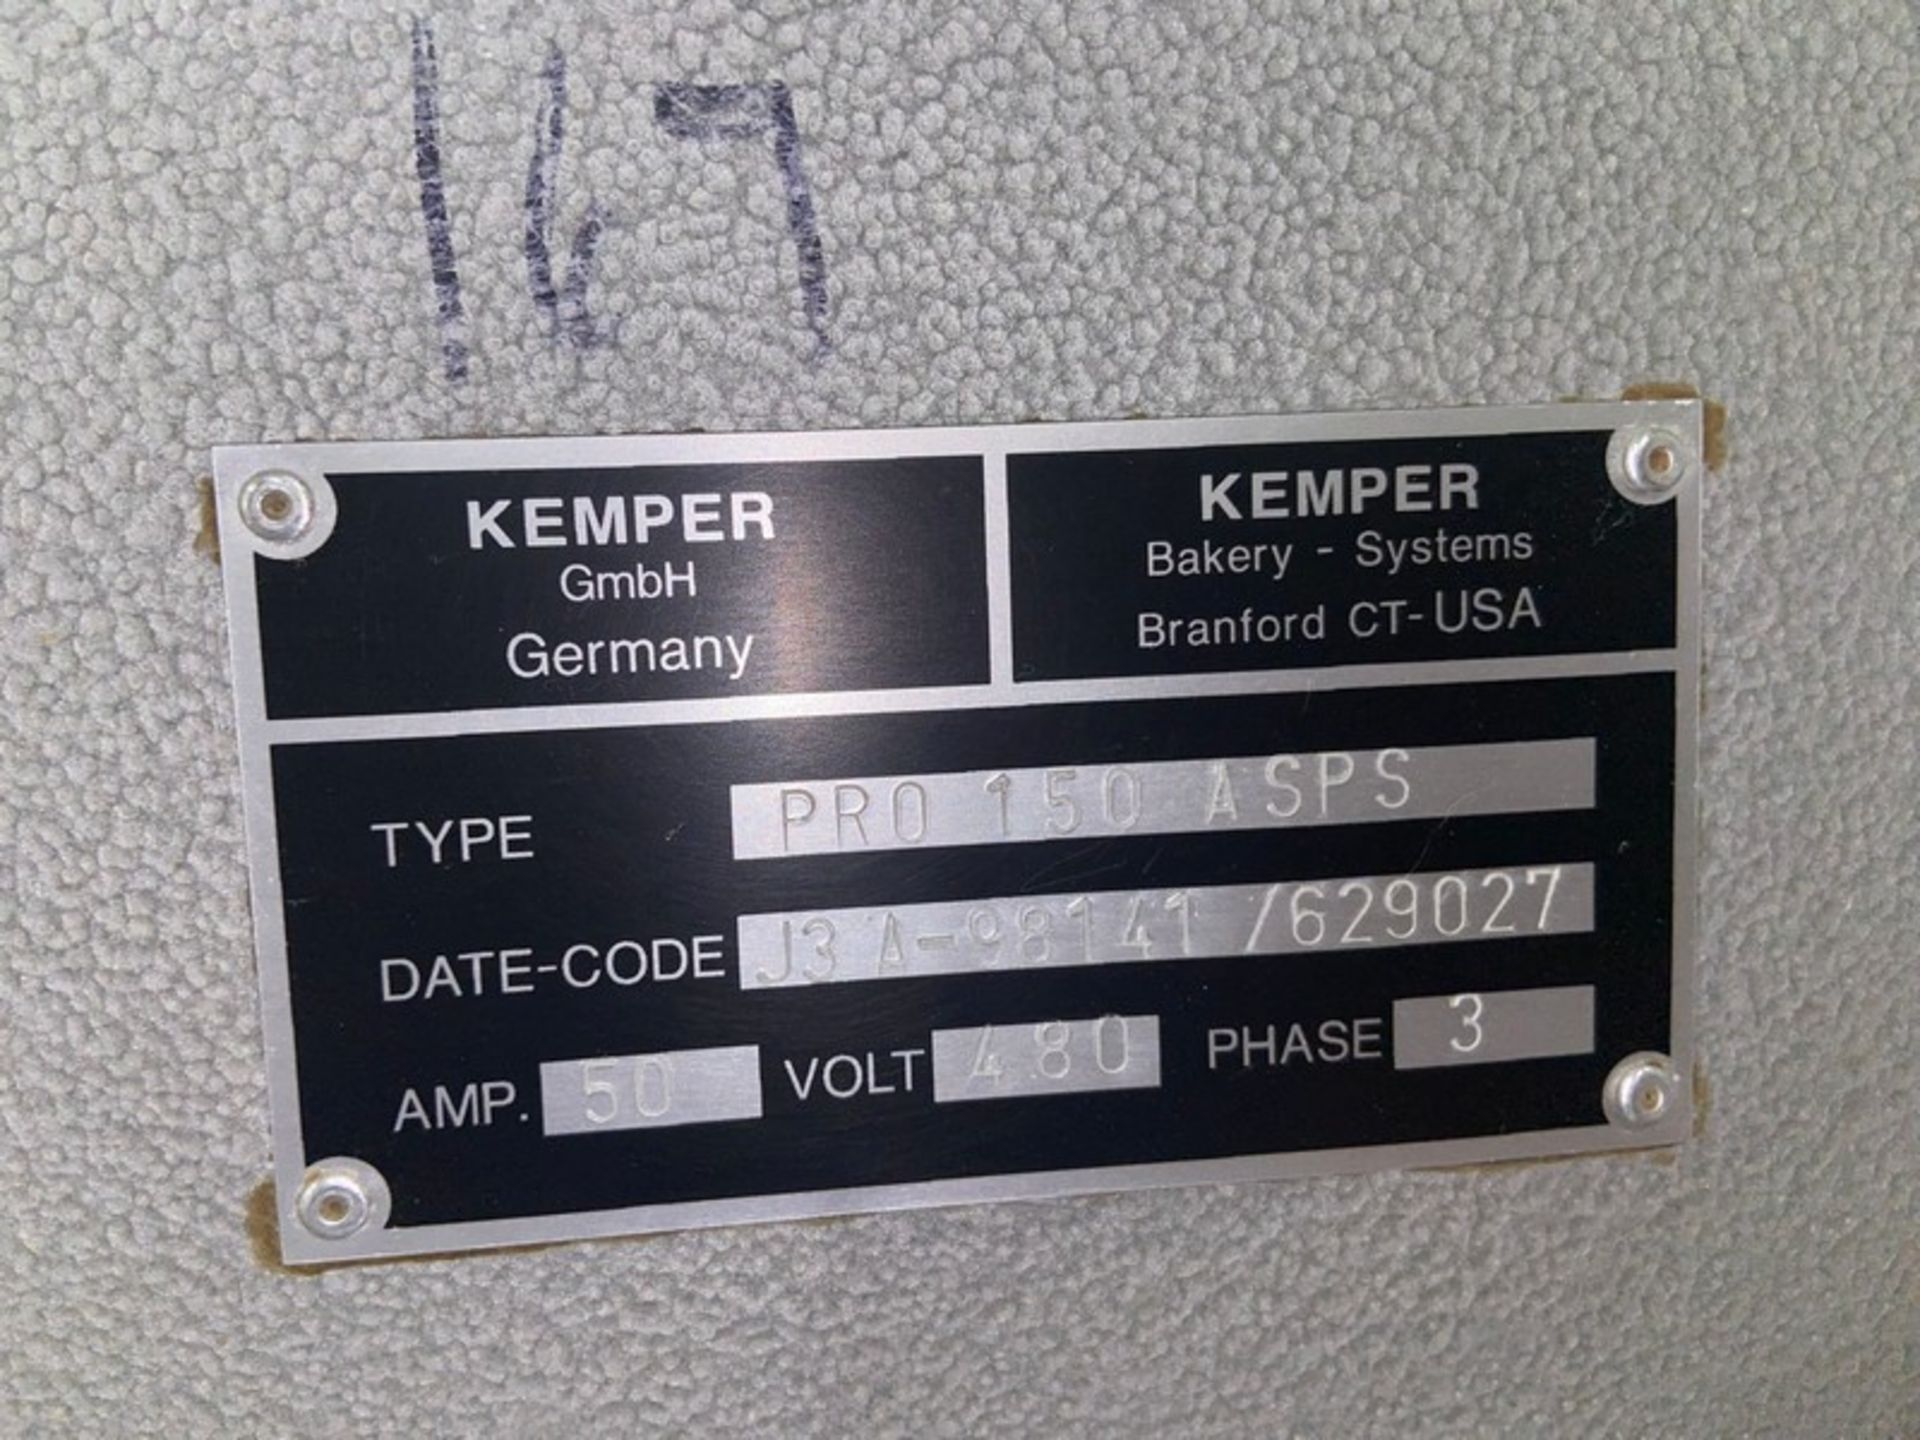 Kemper S/S Dough Mixer, Type: PRO 150 ASPS, Date-Code: J3A-98141/629027, 480 Volts, 3 Phase, with - Image 9 of 13